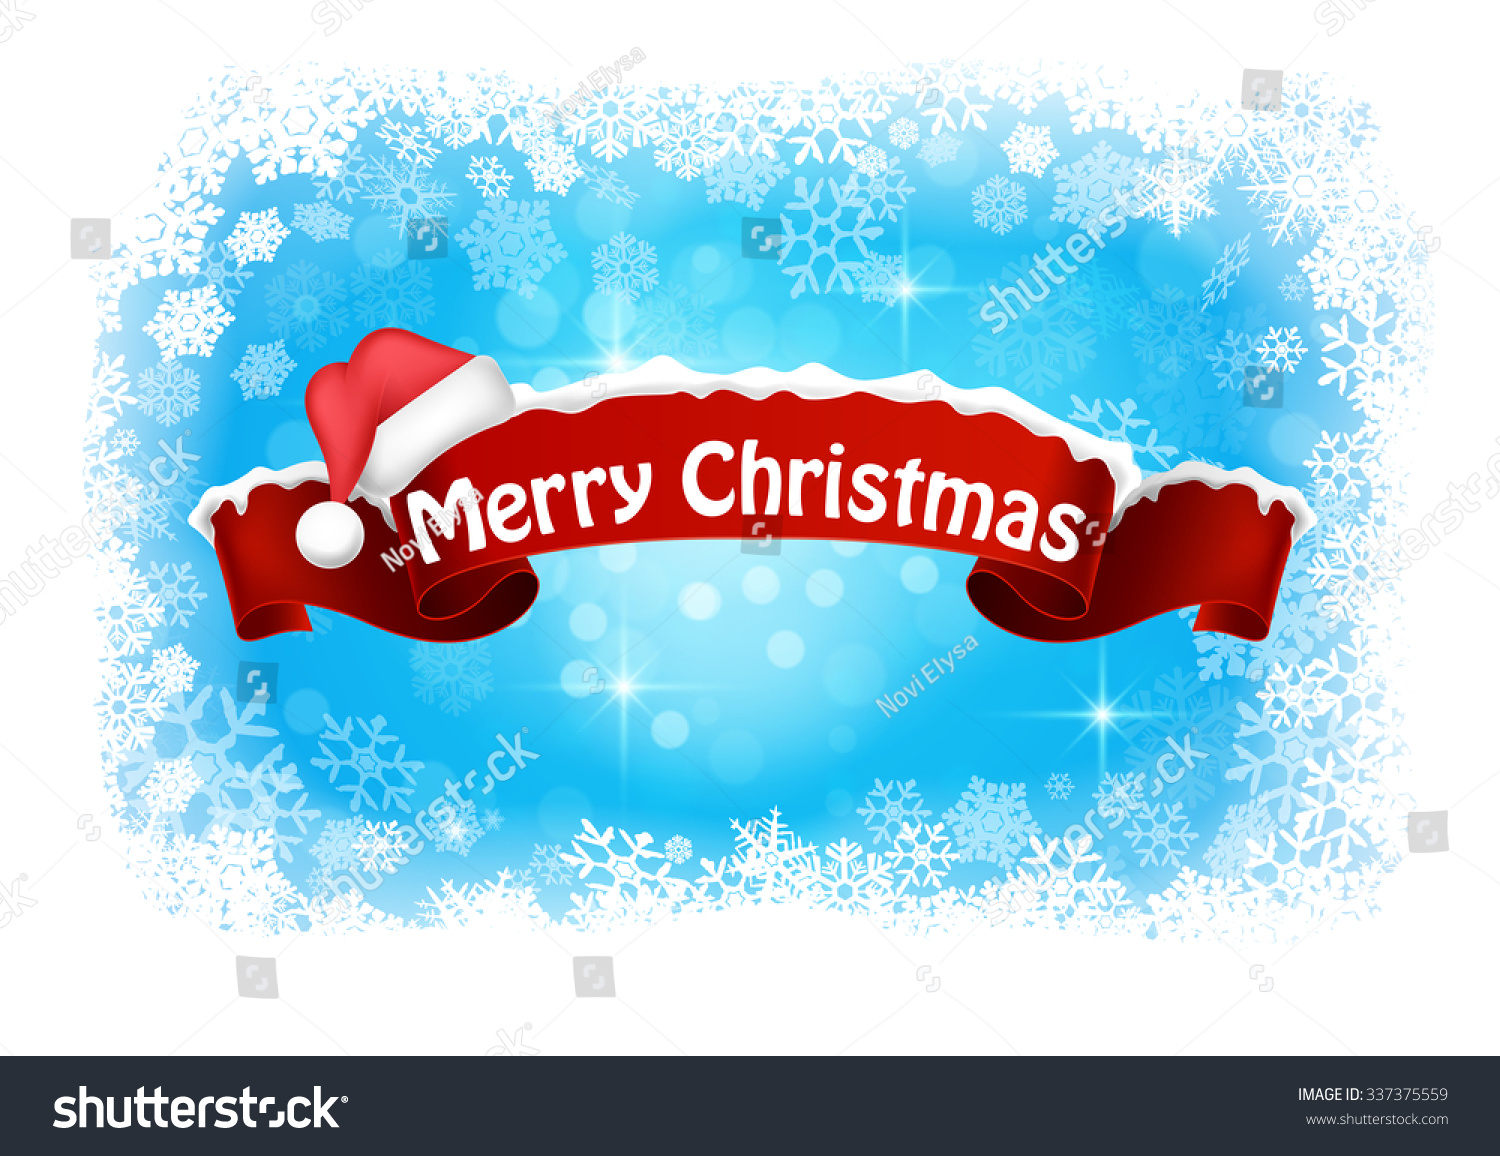 Merry Christmas Abstract Background Banner Stock Photo 337375559 : Shutterstock